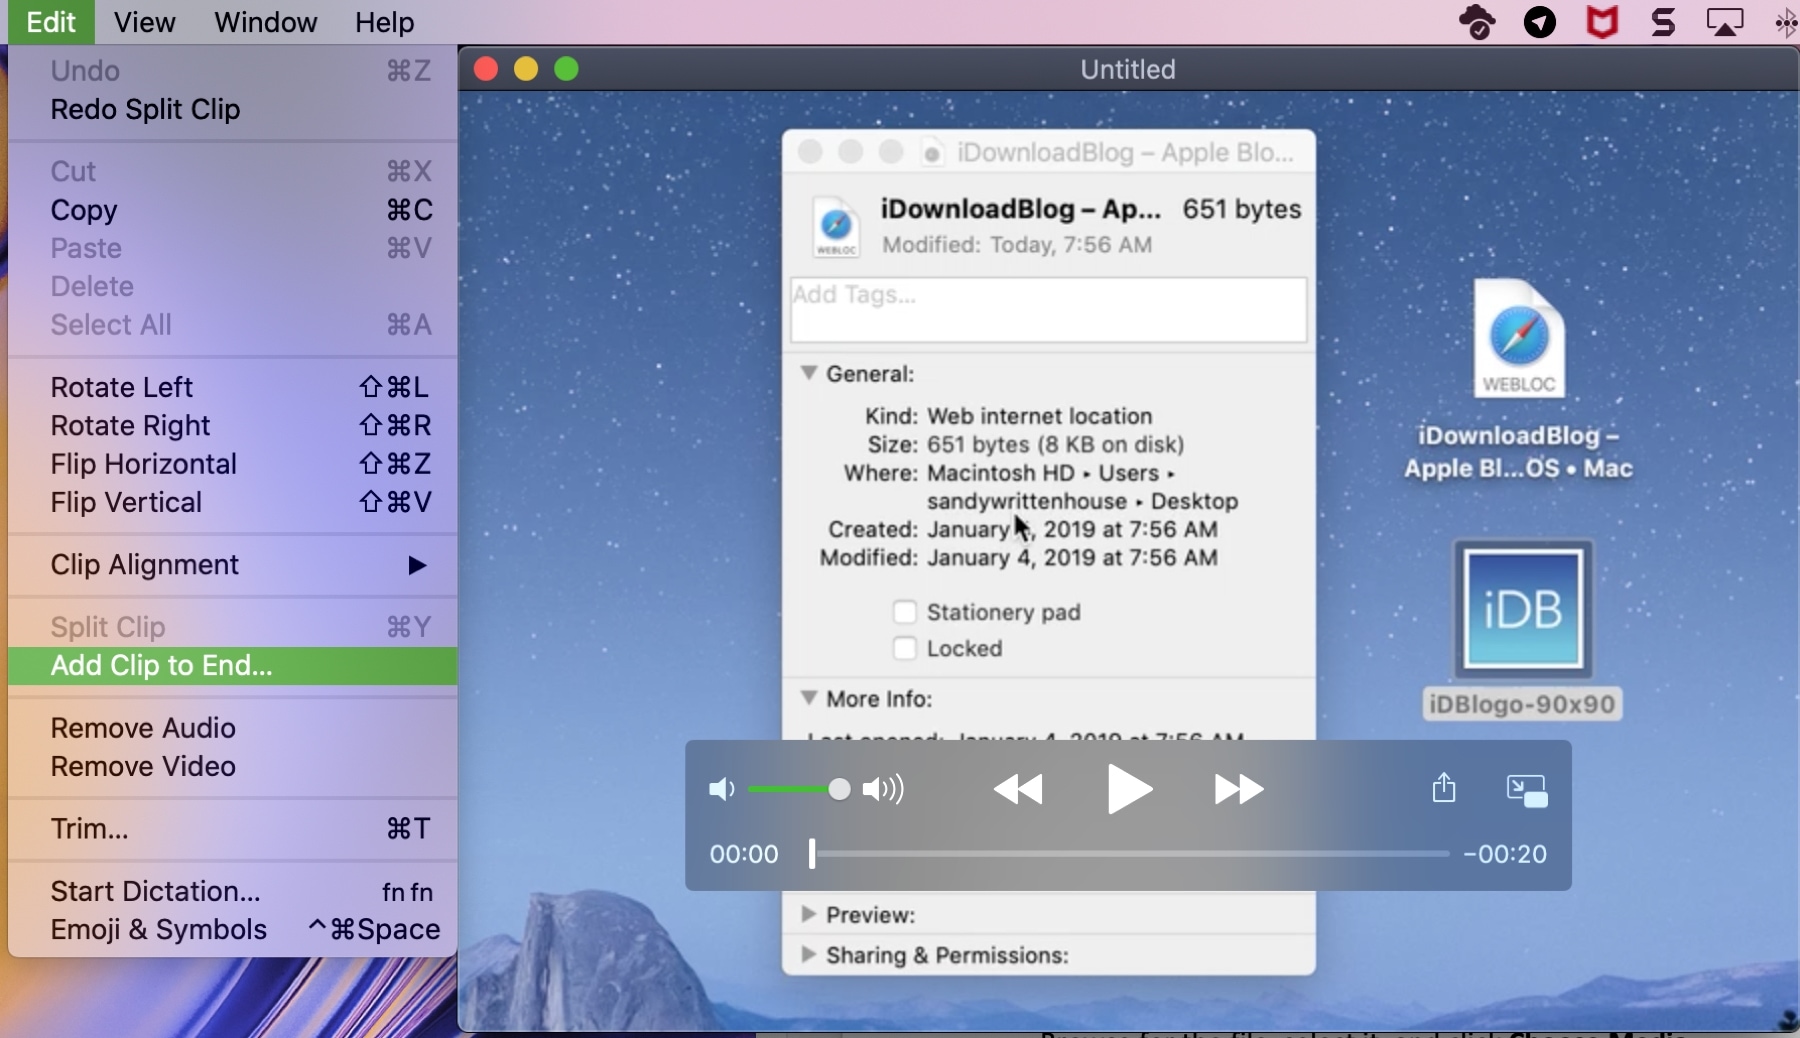 download quicktime for mac